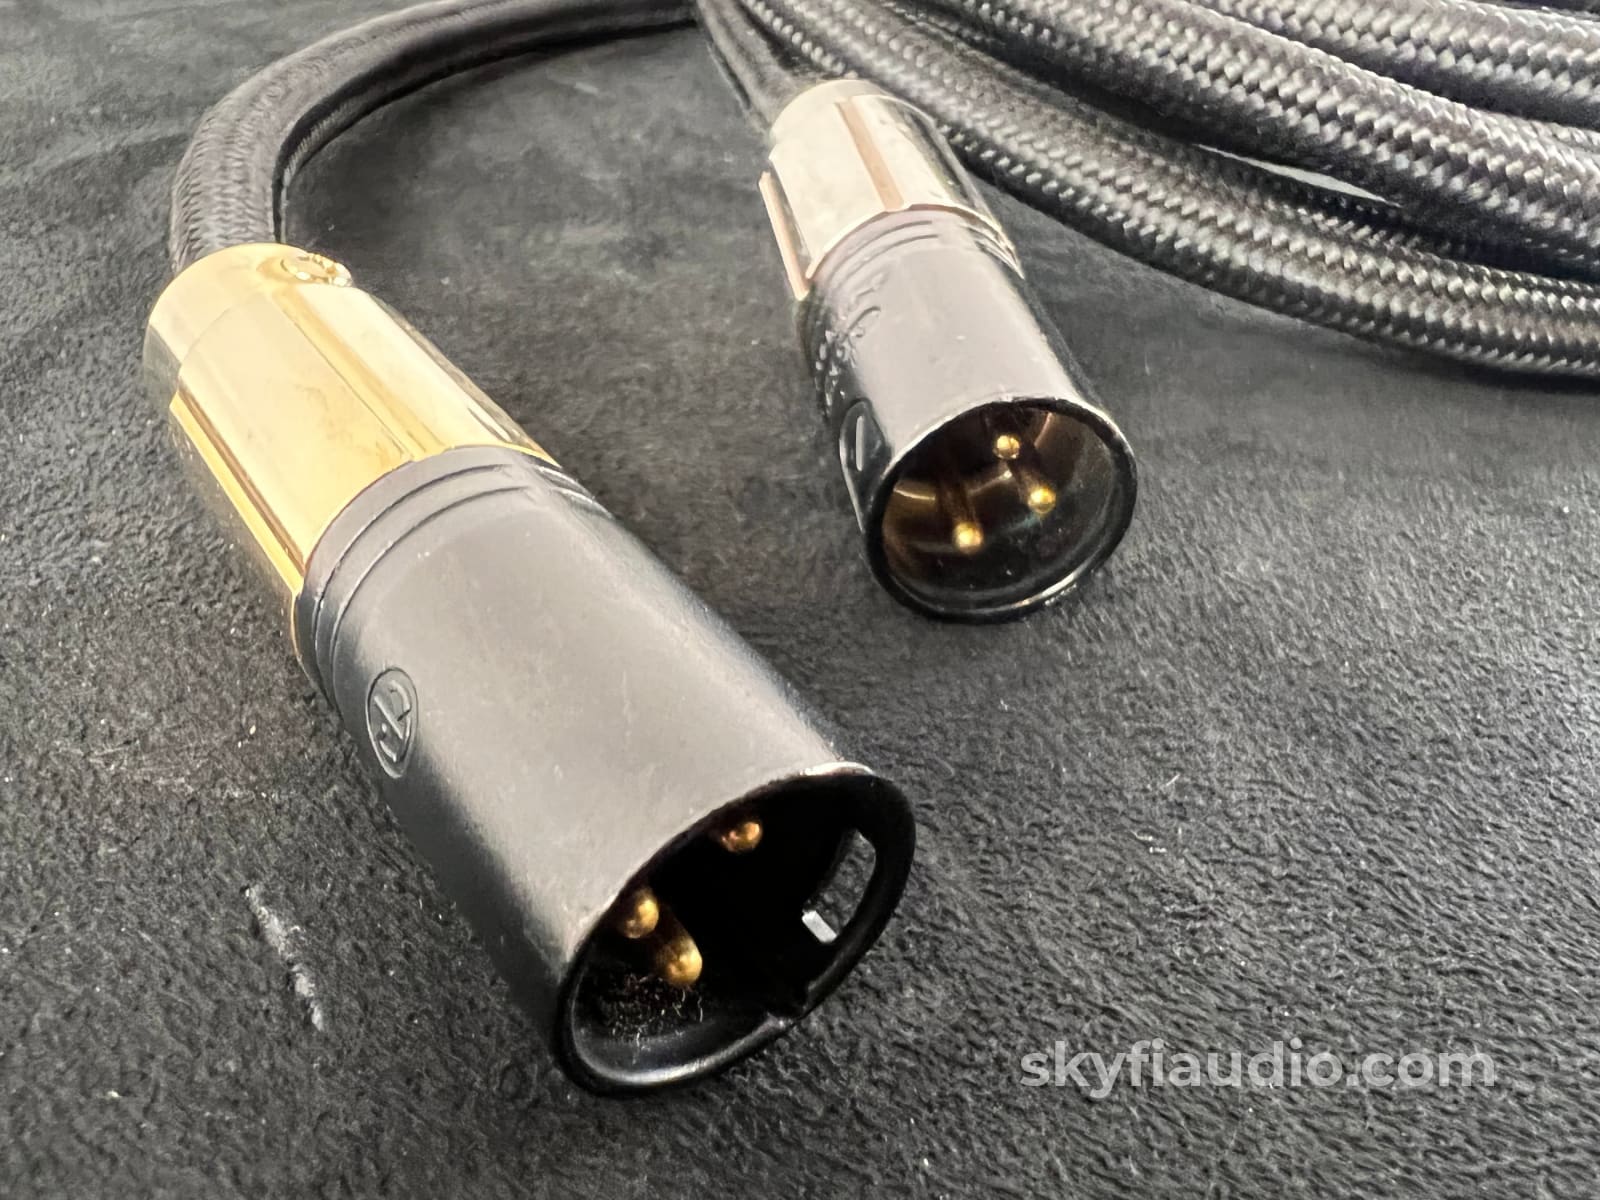 McIntosh XLR Audio Interconnects (Pair) - 2m - In Store Only